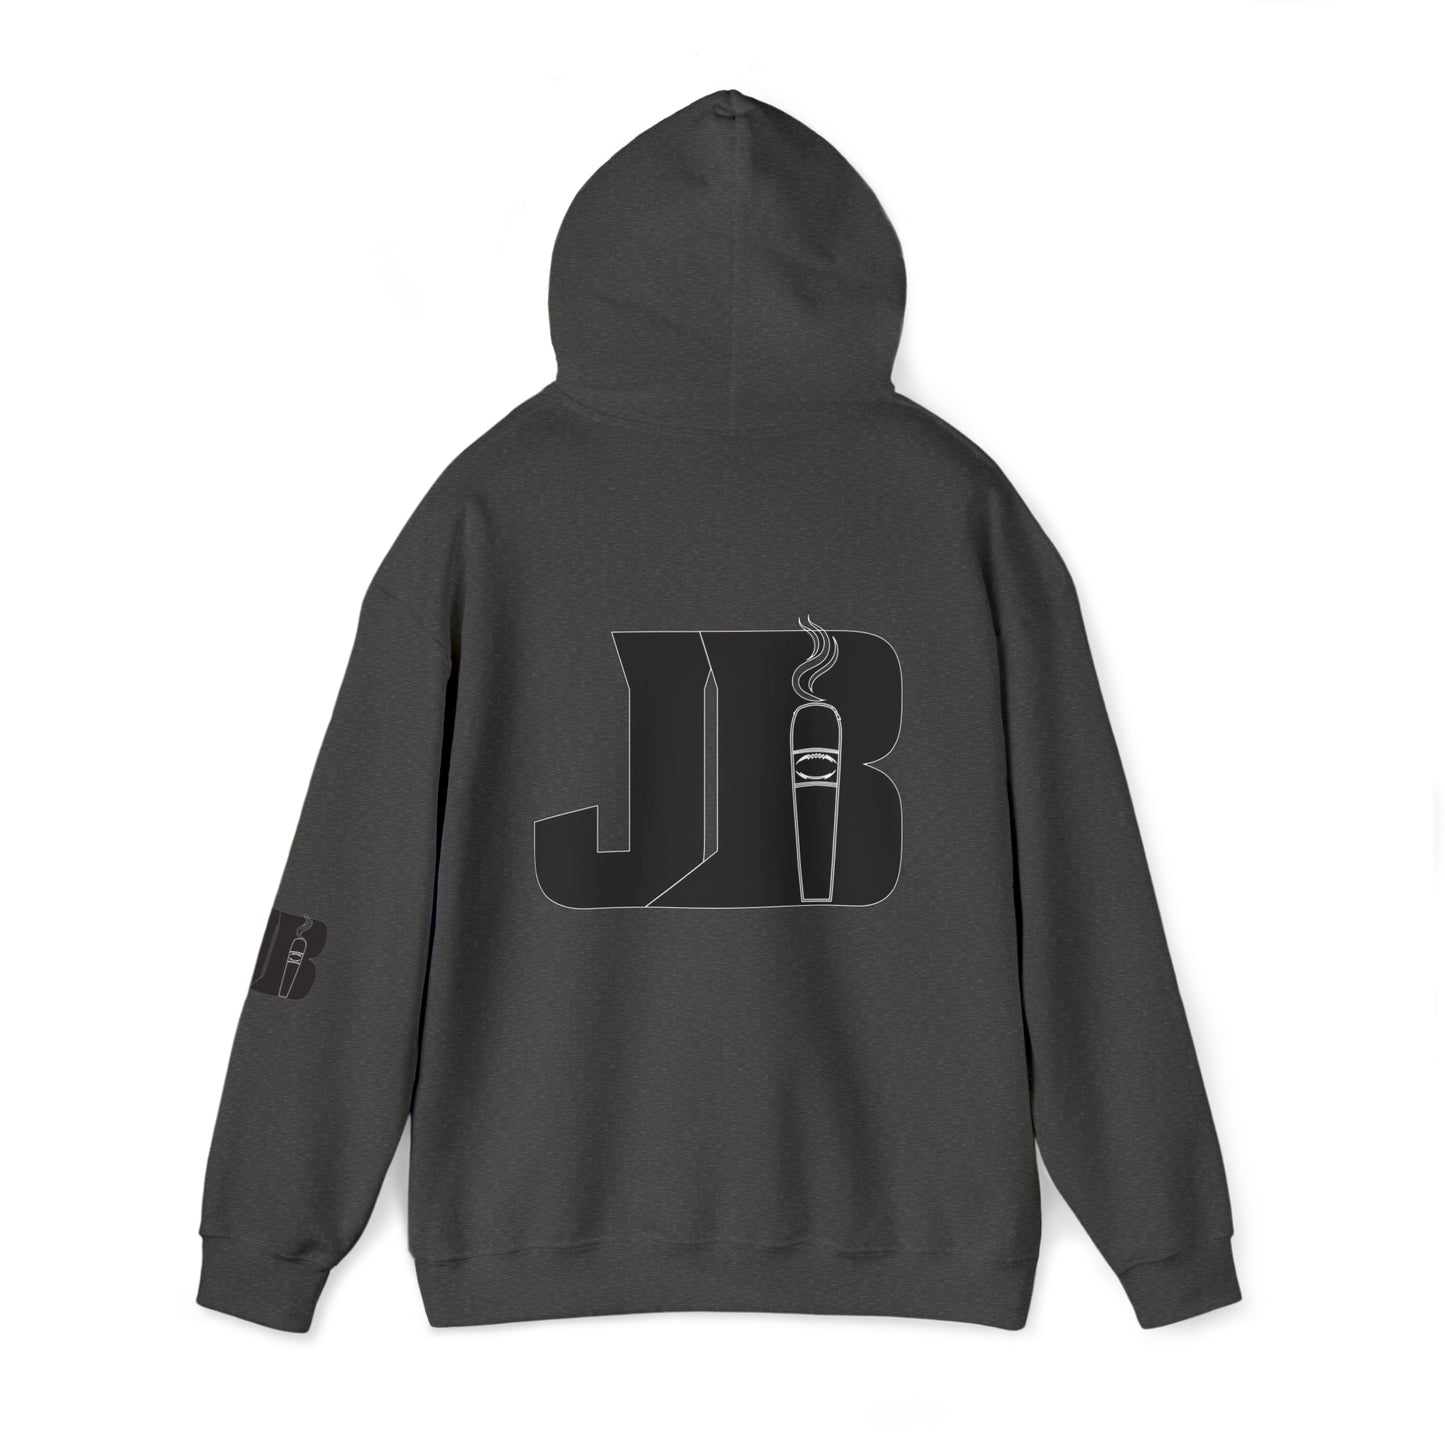 The Coach JB Show "Front Logo" Hoodie